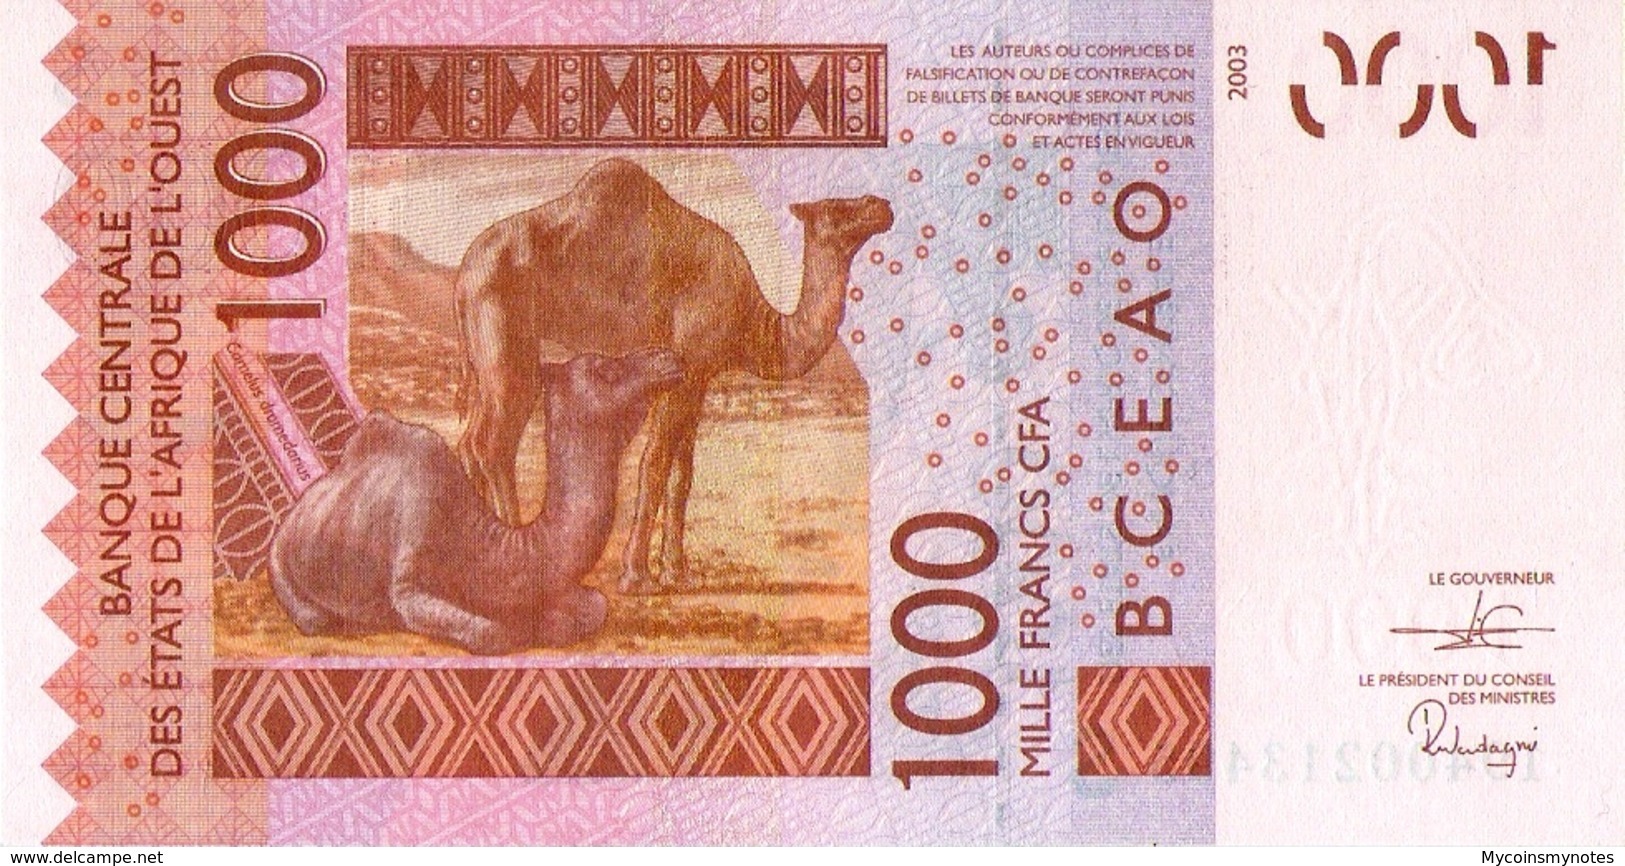 WEST AFRICAN STATES, Guinea Bissau,1000, 2019, Code S, P-NEW "Not Listed In Catalog", UNC - Guinea-Bissau